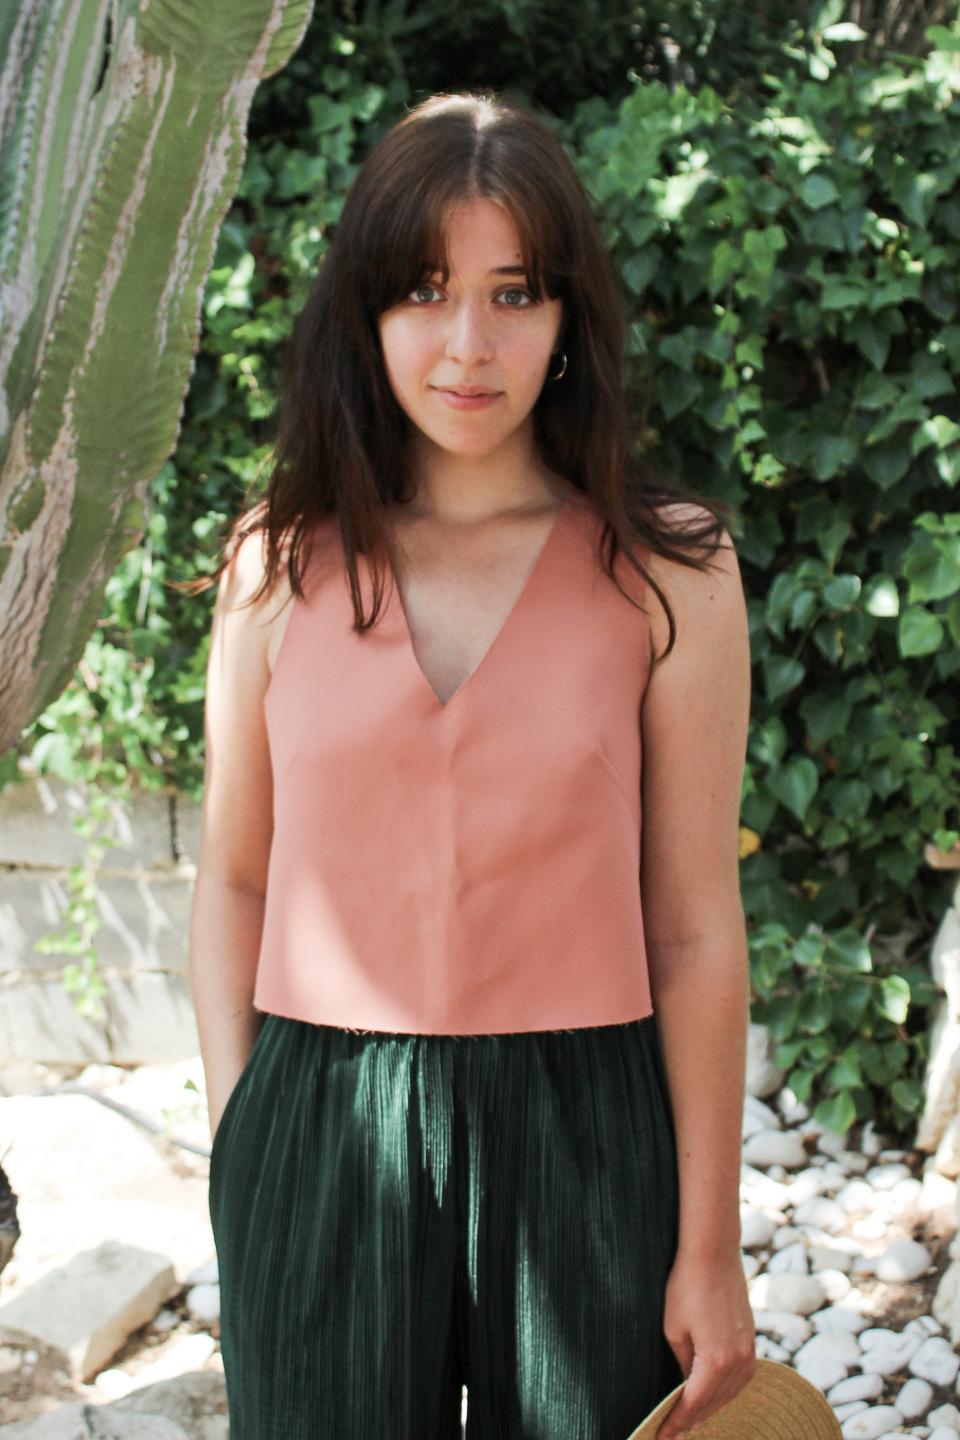 Pink and green outfit